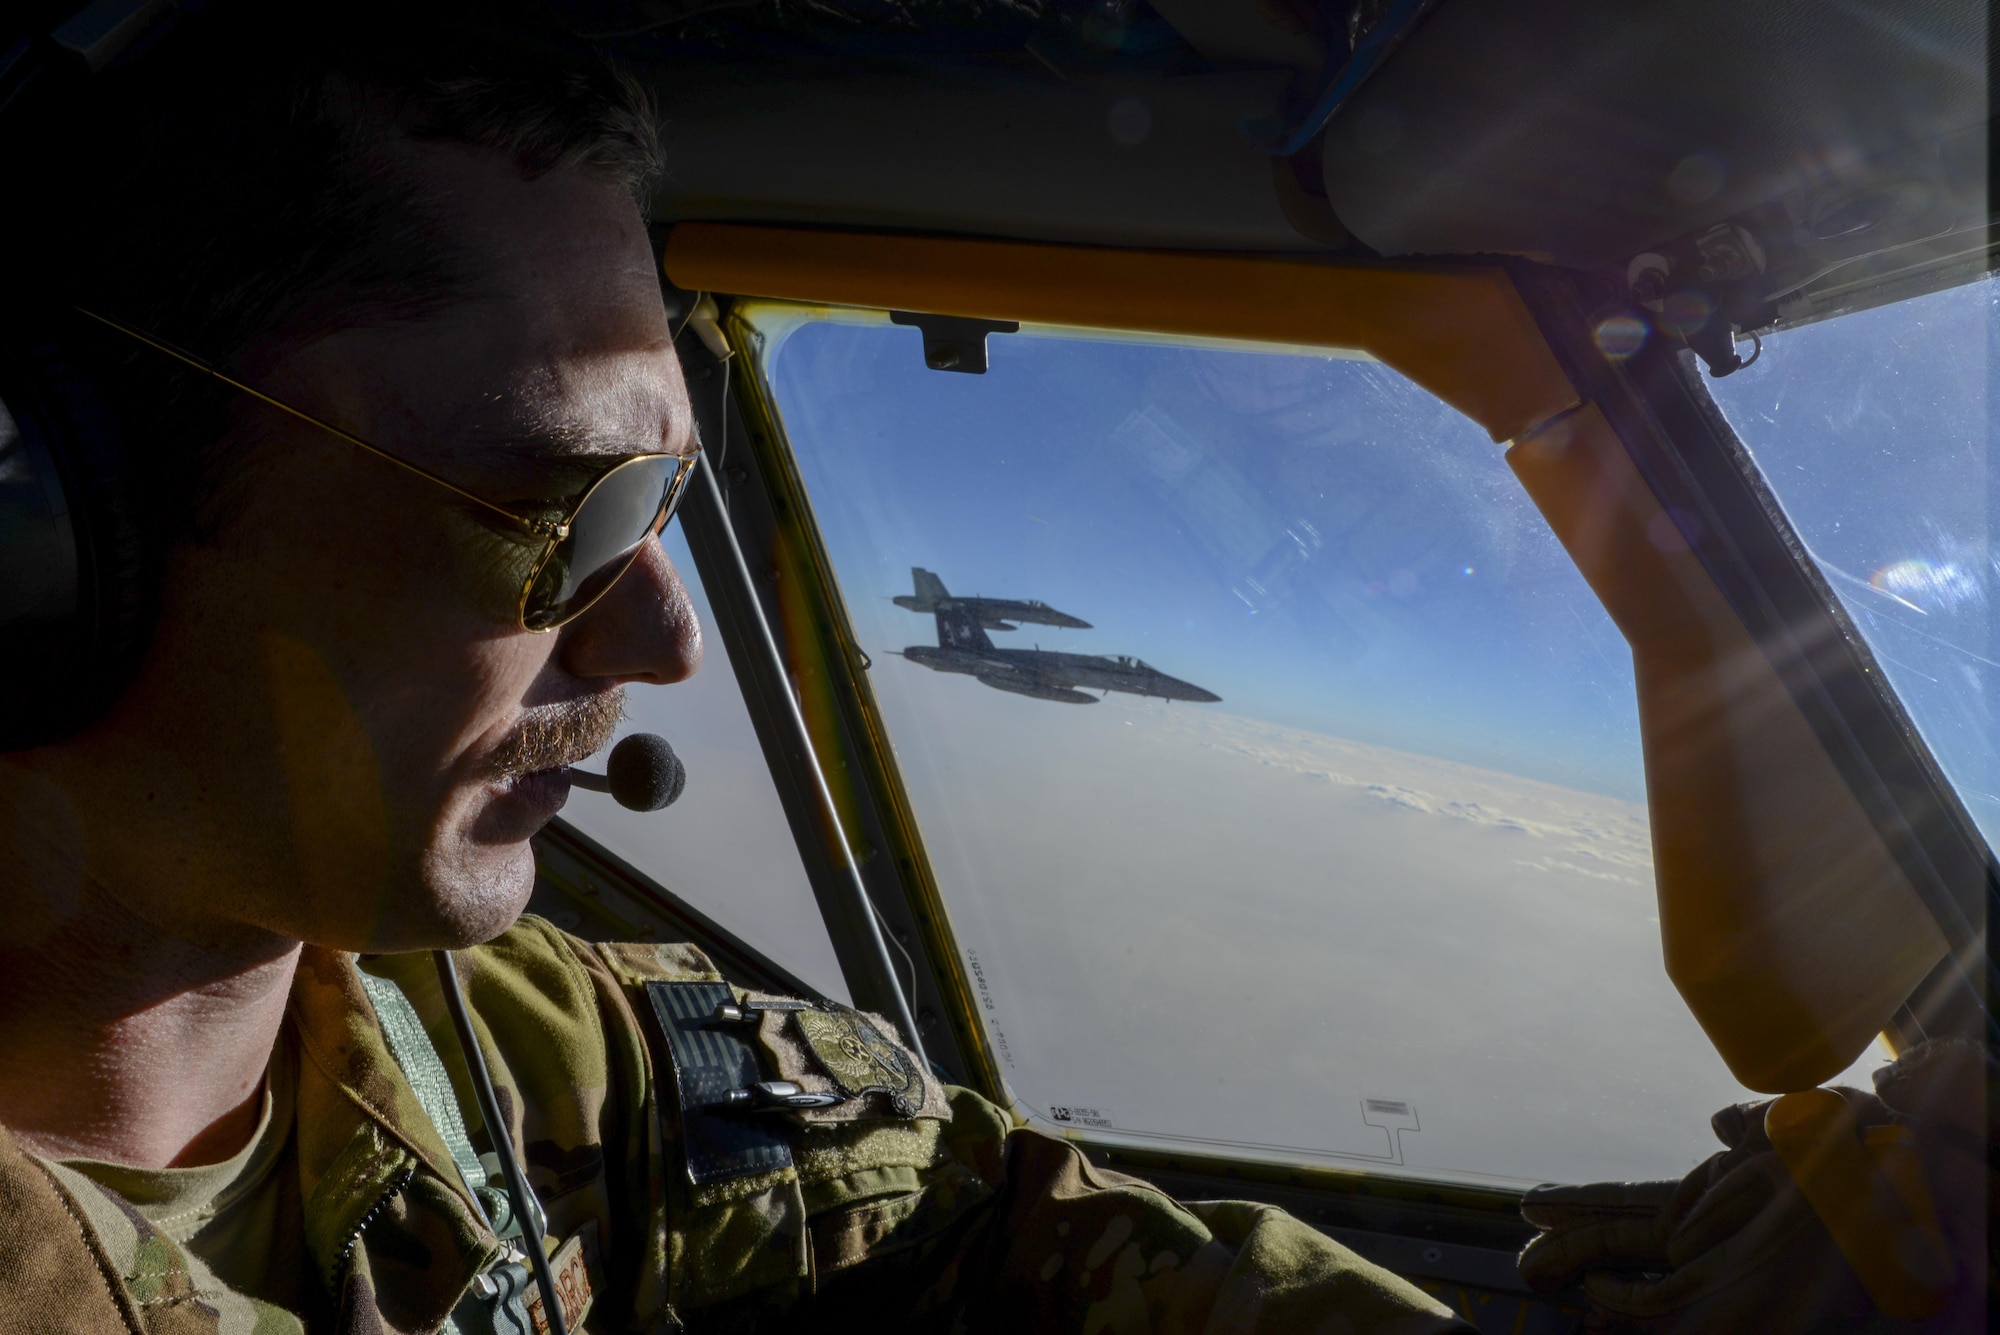 U.S. Air Force Capt. Timothy Black, aircraft commander, pilots a KC-135 Stratotanker on a combat refueling mission over Southwest Asia while two U.S. Navy F/A-18Cs from the VFA-37 Ragin' Bulls fly in formation alongside the aircraft May 21, 2017. Assigned to the 340th Expeditionary Air Refueling Squadron, out of Al Udeid Air Base, Qatar, the tanker from the 186th Air Refueling Wing, Mississippi Air National Guard was fitted with a drogue attached to the boom, for specialized receiver equipment on Navy and coalition aircraft. The 340 EARS maintains a 24/7 presence in the AOR, supporting Operation Inherent Resolve and the fight against ISIS. (U.S. Air National Guard photo by Master Sgt. Andrew J. Moseley/Released)